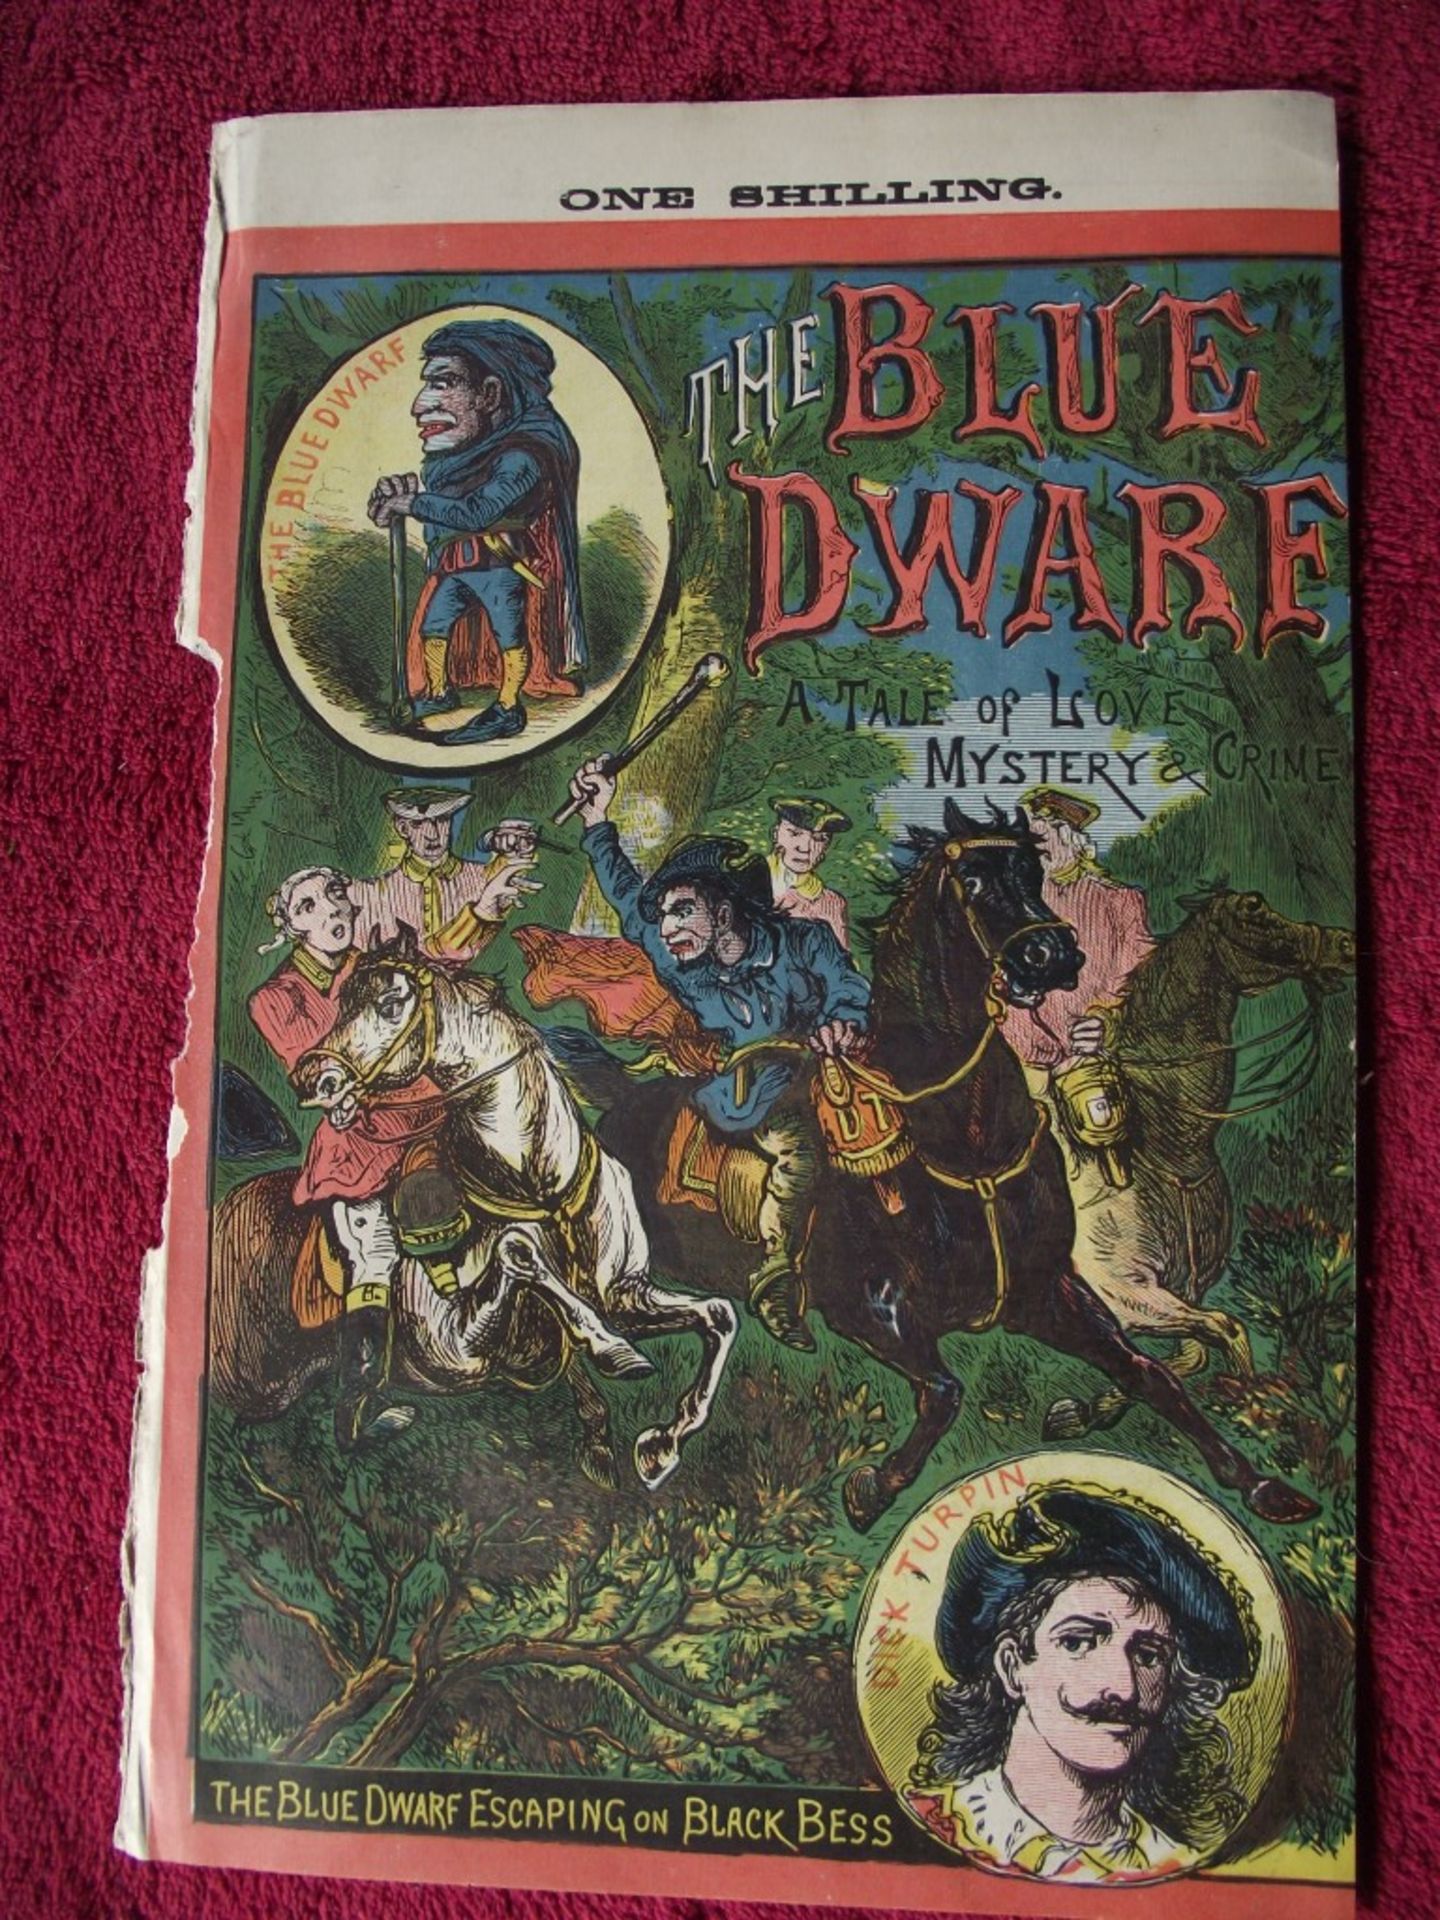 16 x Lithographic Prints From The Blue Dwarf - Percy B. St John - + 14 Prints - Circa 1880's - Image 33 of 39